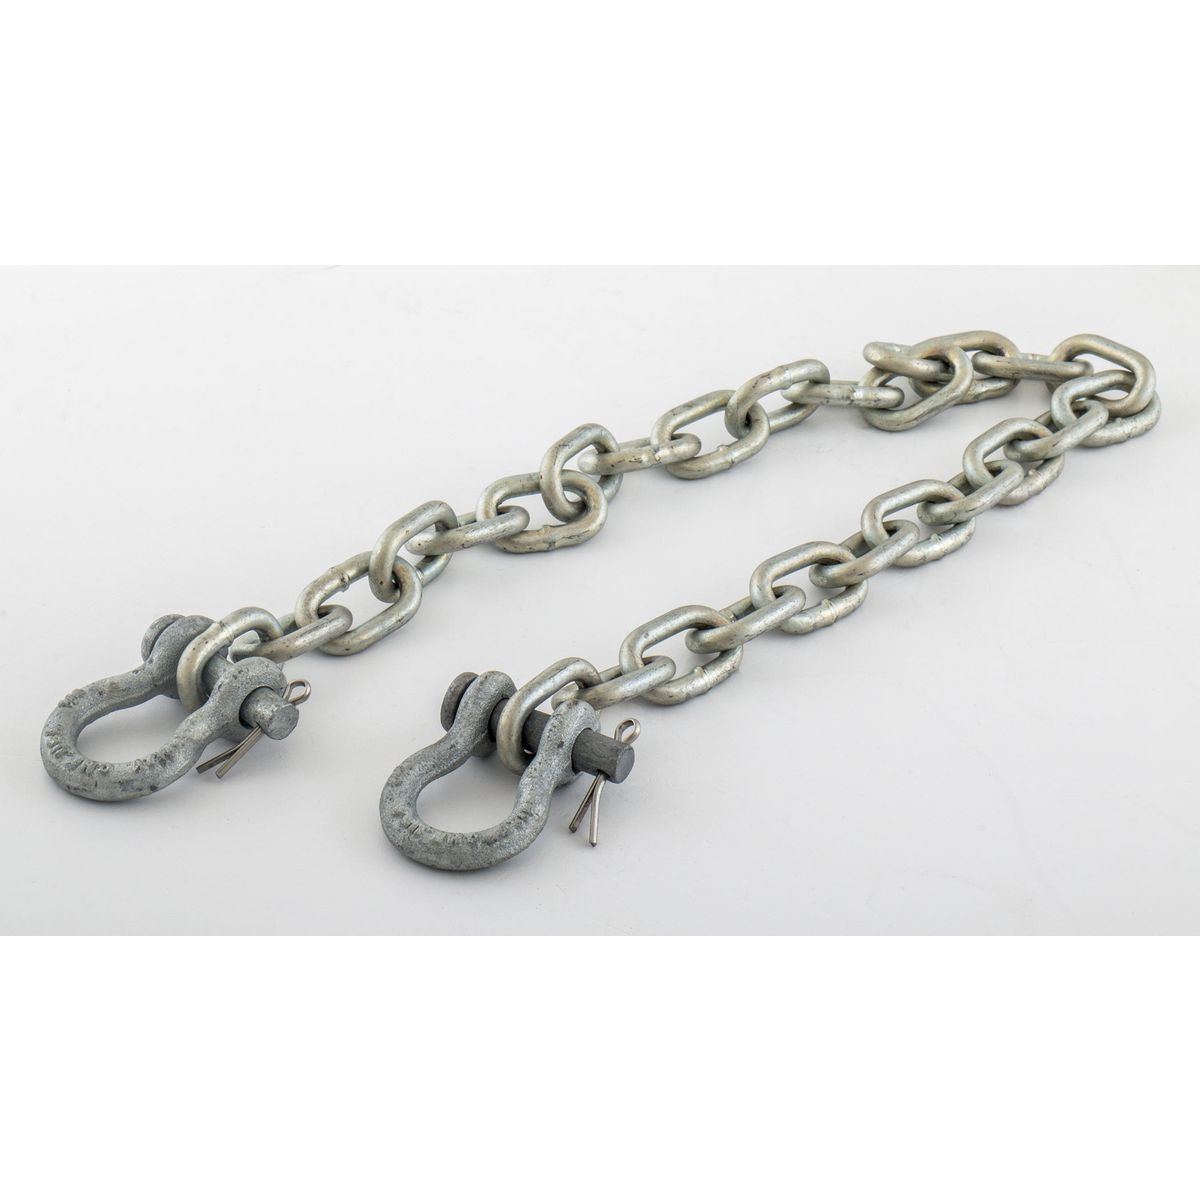 SAFETY CHAIN 1.0 FT LG